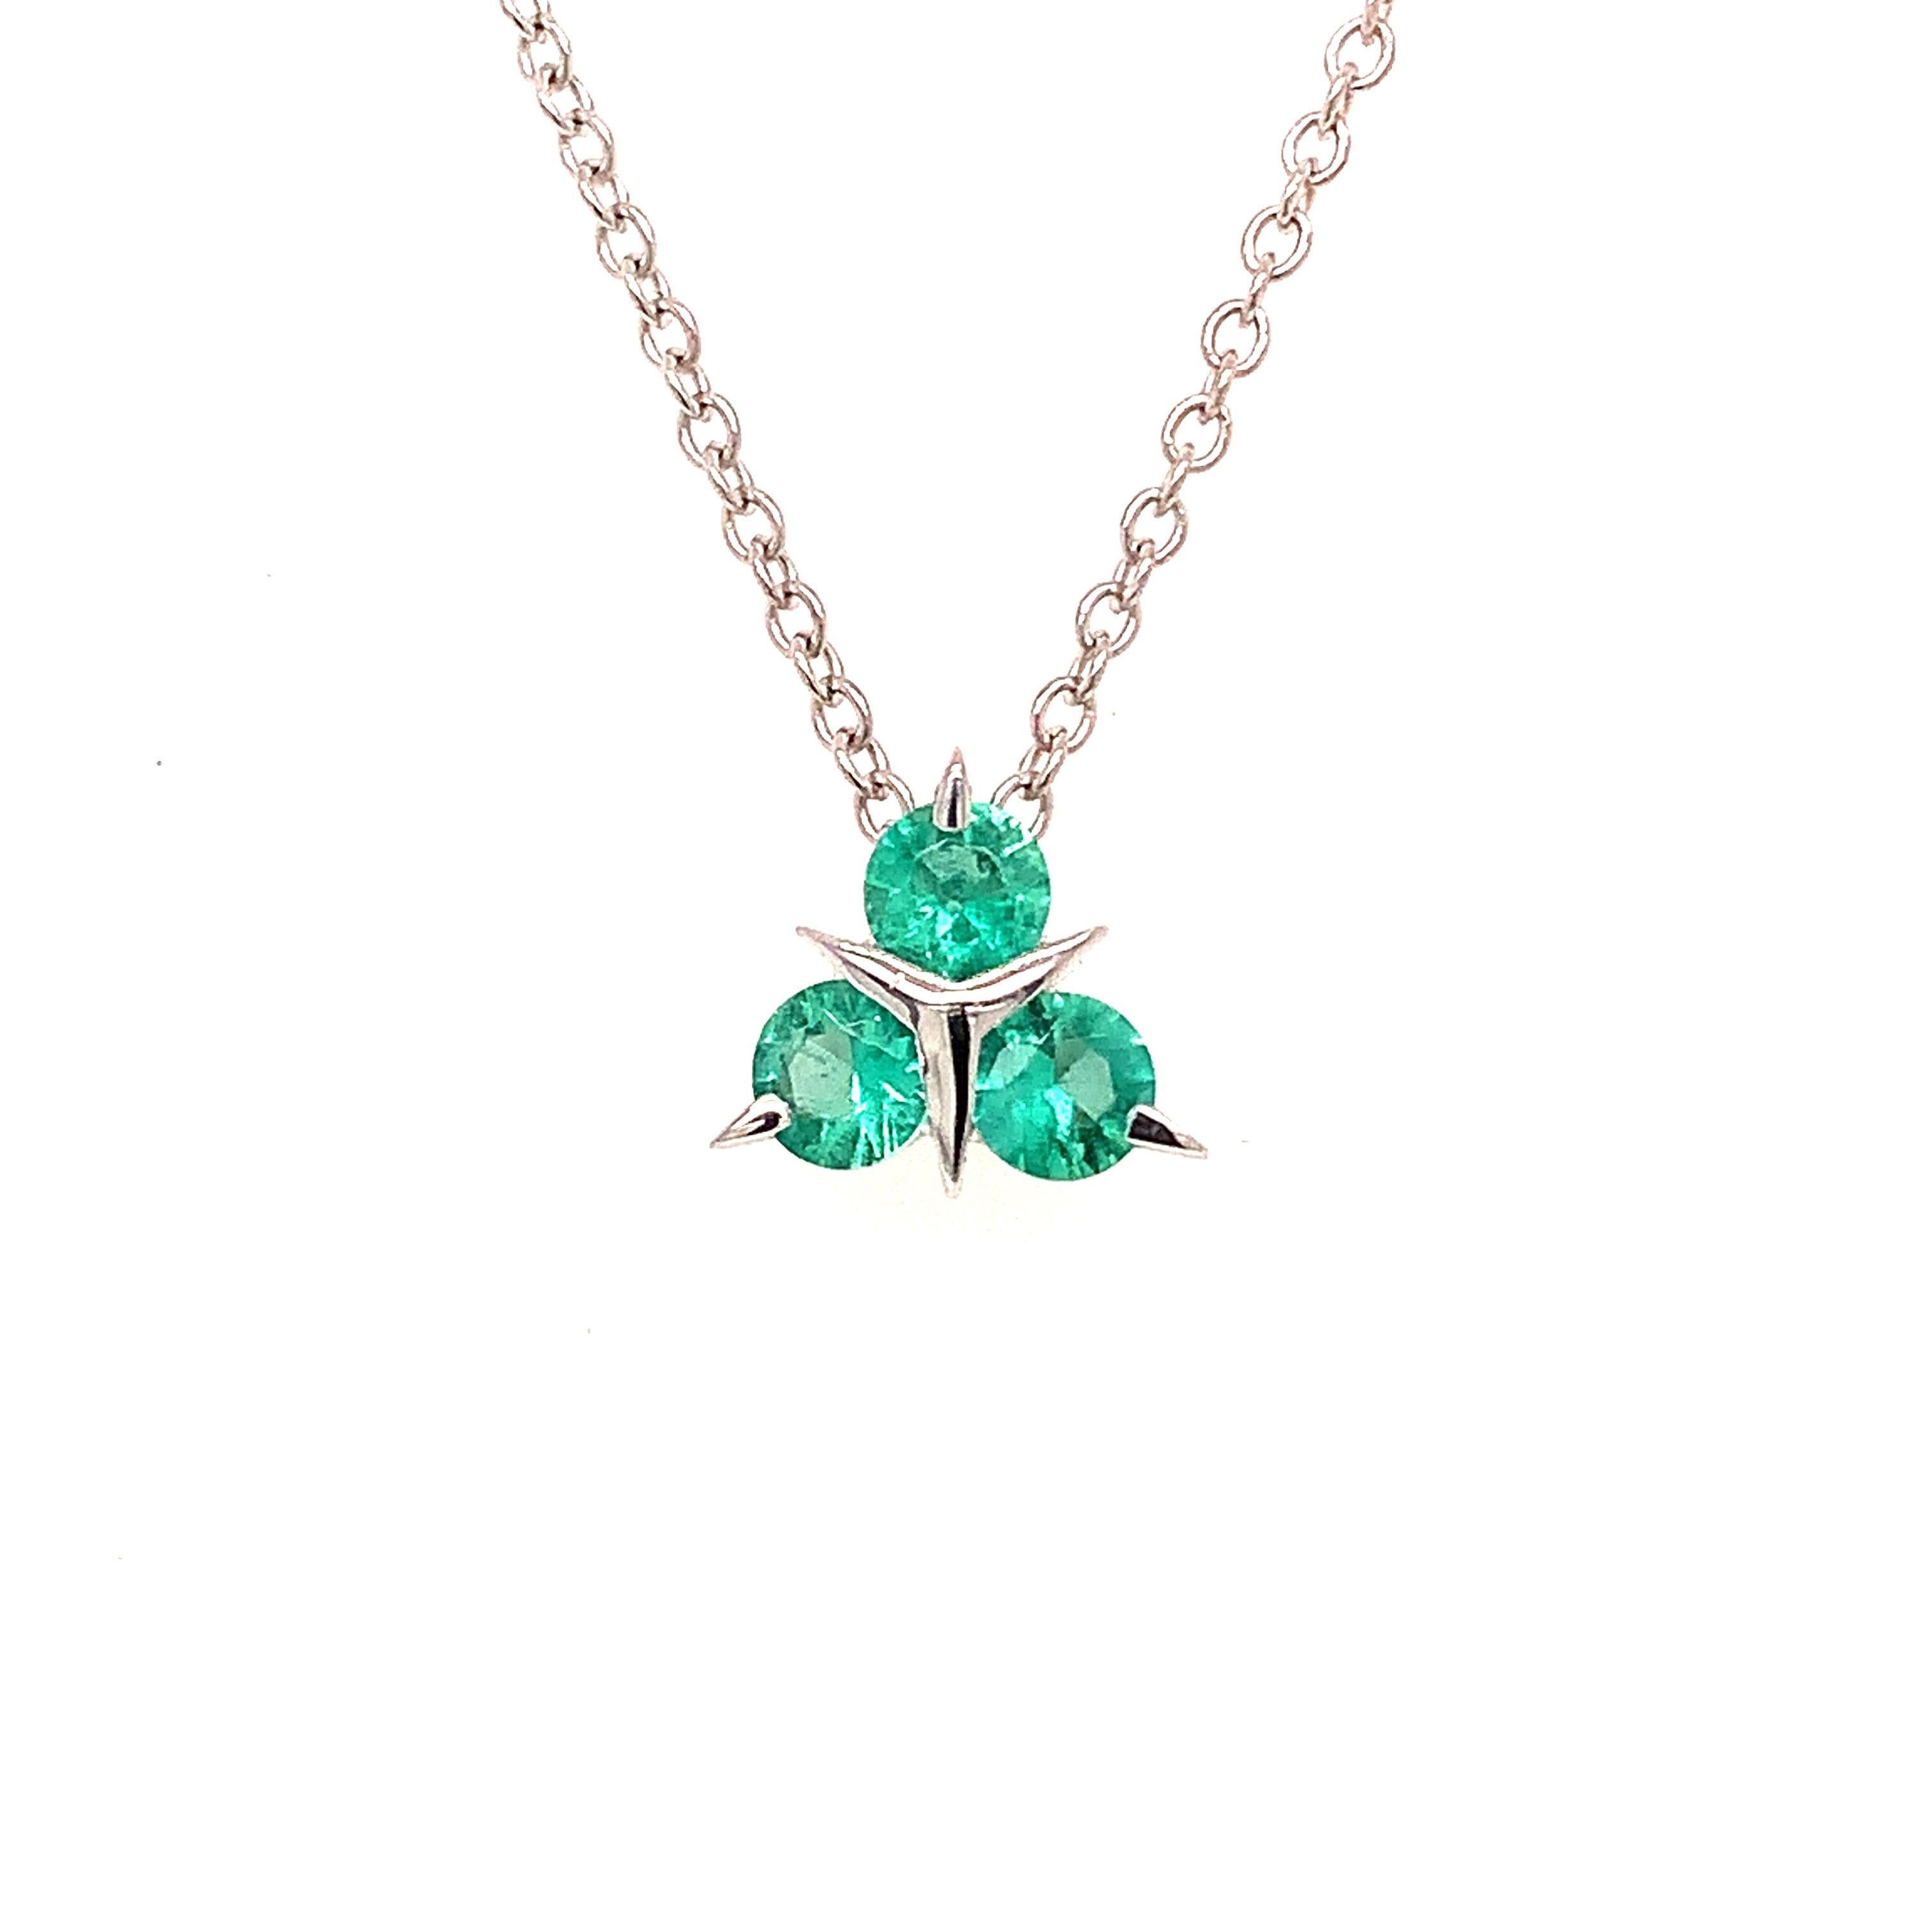 Garavelli pendant with chain in  very unique and pretty design, in white gold 18 kt with three perfect round emeralds to a total carat weight of 0.40
 Available also in diamonds, brown diamonds, black diamonds, sapphires, rubies. Matching earrings